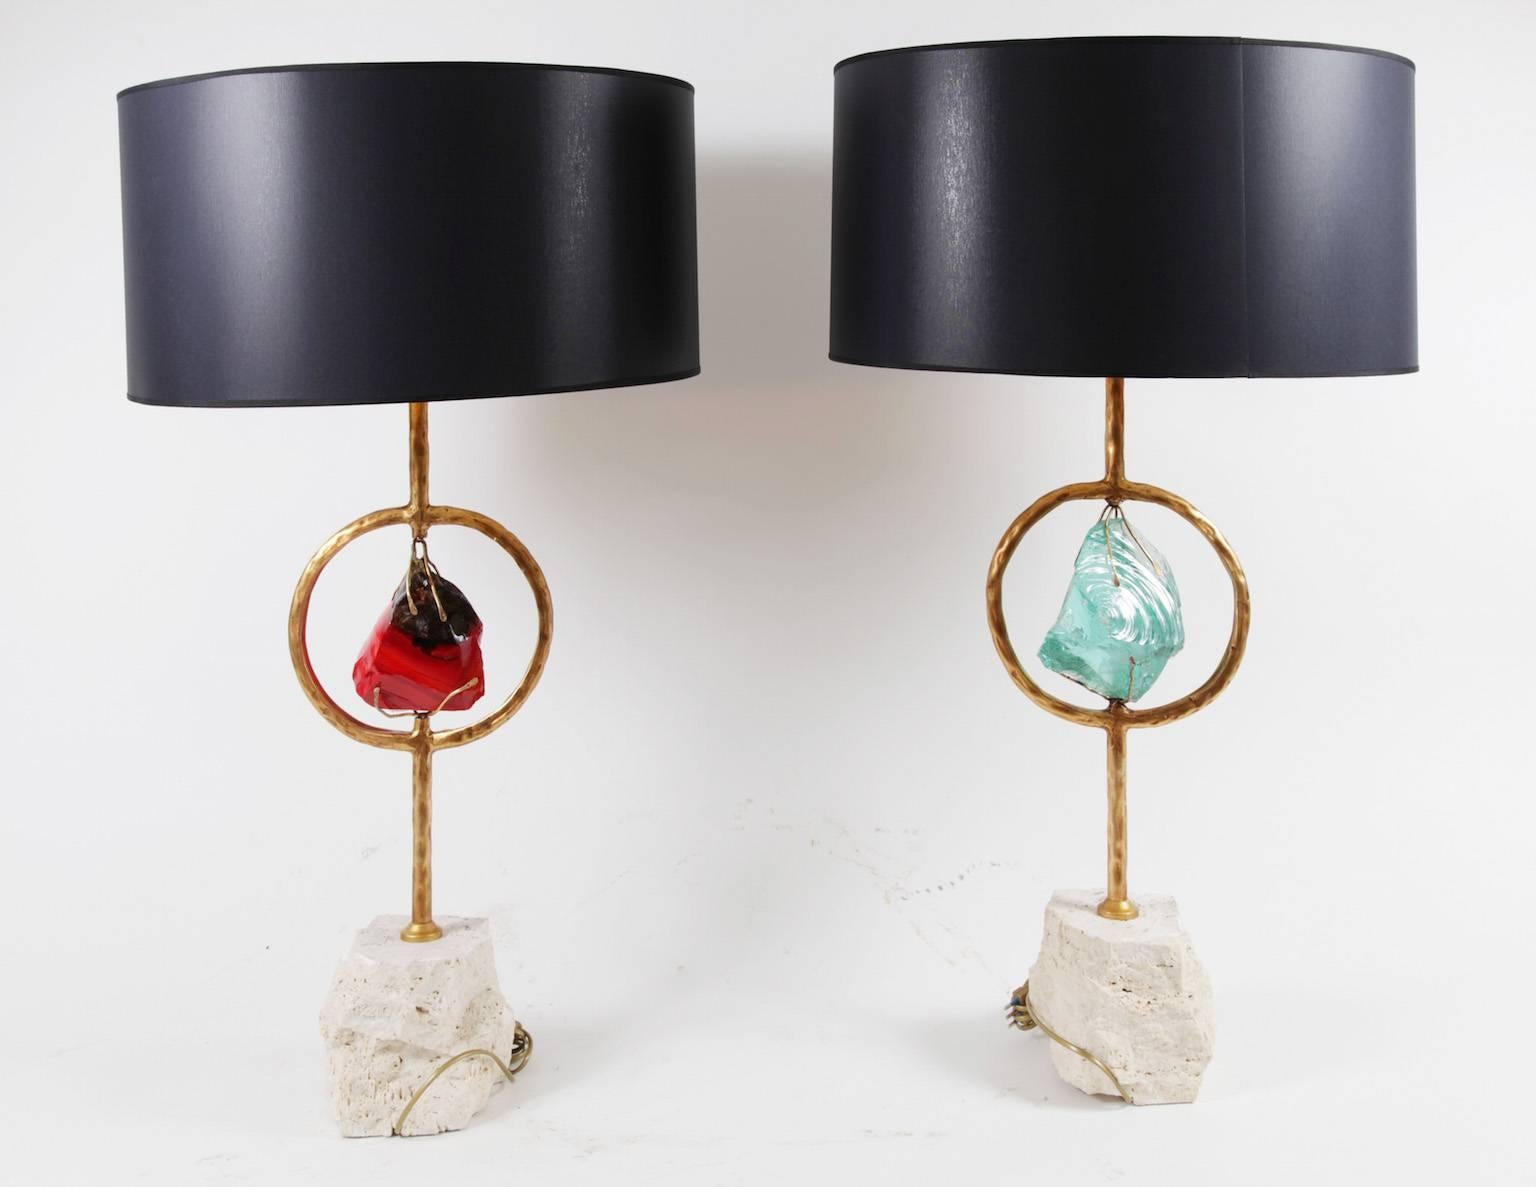 Modern Pair of Brass, Crystal and Travertine Stone Table Lamps by Michele Notte, 2012